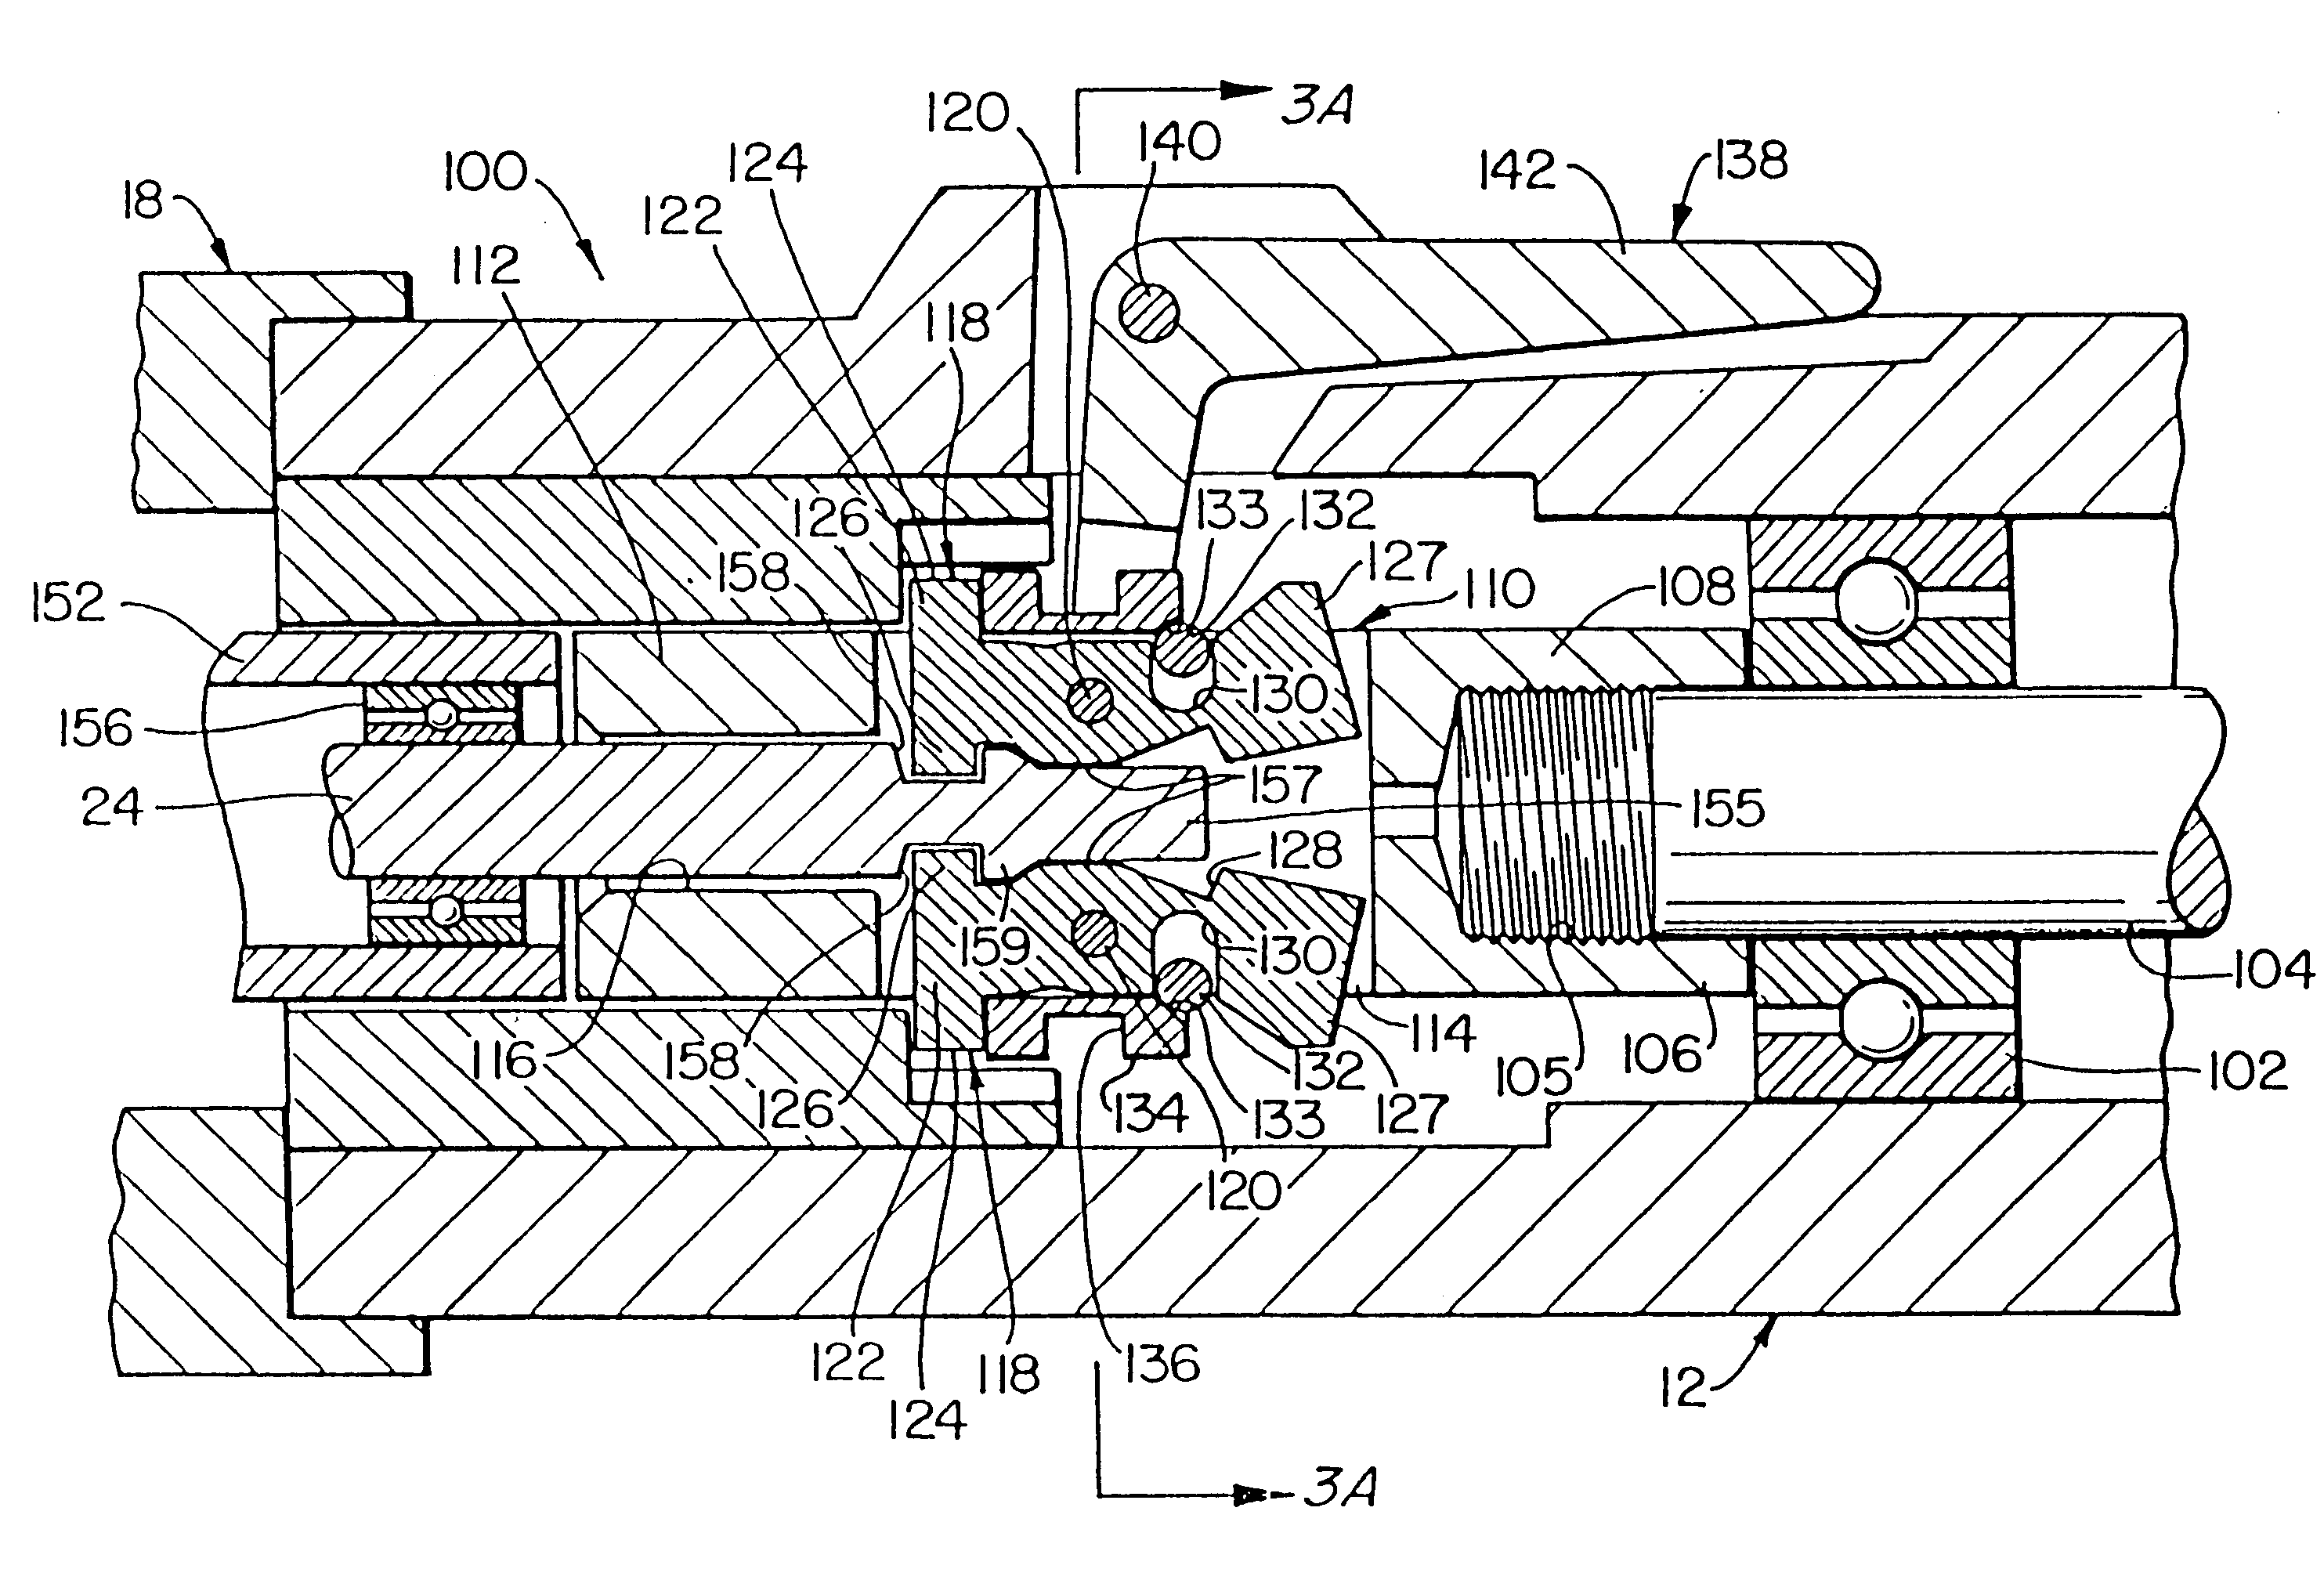 Tool holding mechanism for a motor driven surgical instrument